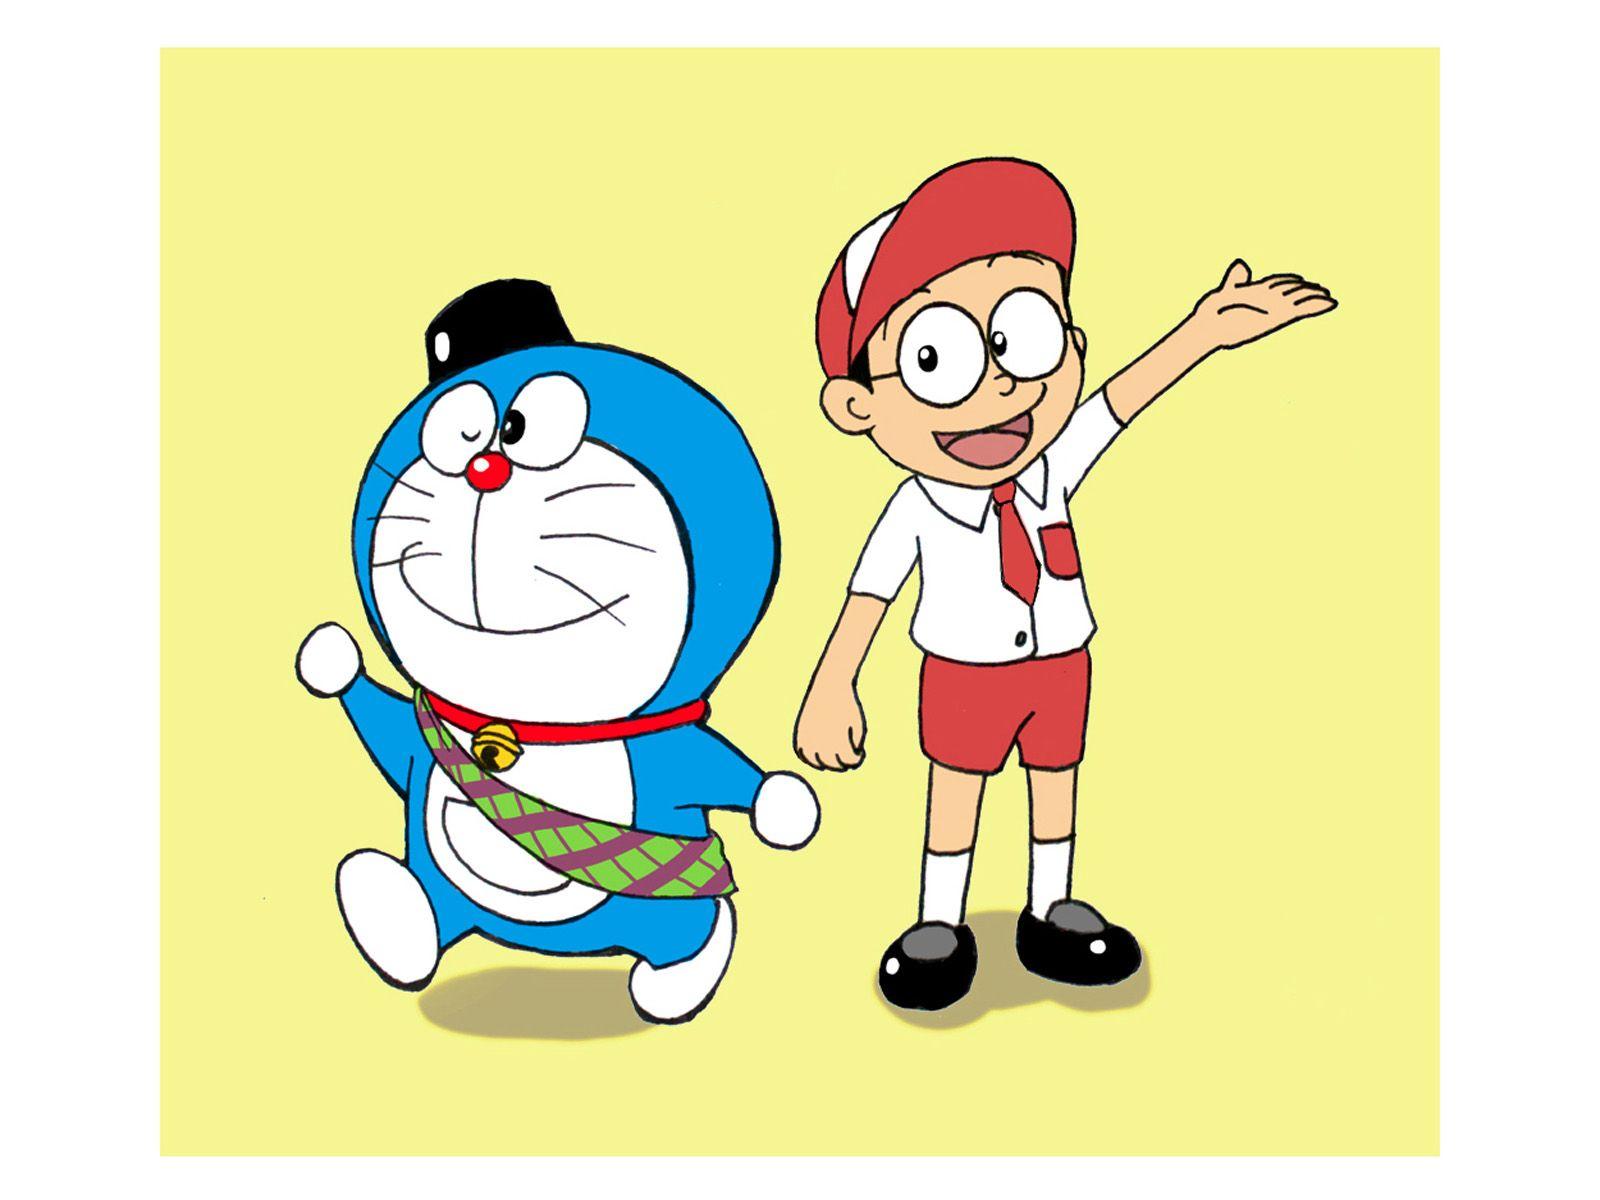 DORAEMON CARTTON CHARACTER HD WALLPAPER ON FINE ART PAPER Fine Art Print   Animation  Cartoons posters in India  Buy art film design movie  music nature and educational paintingswallpapers at Flipkartcom